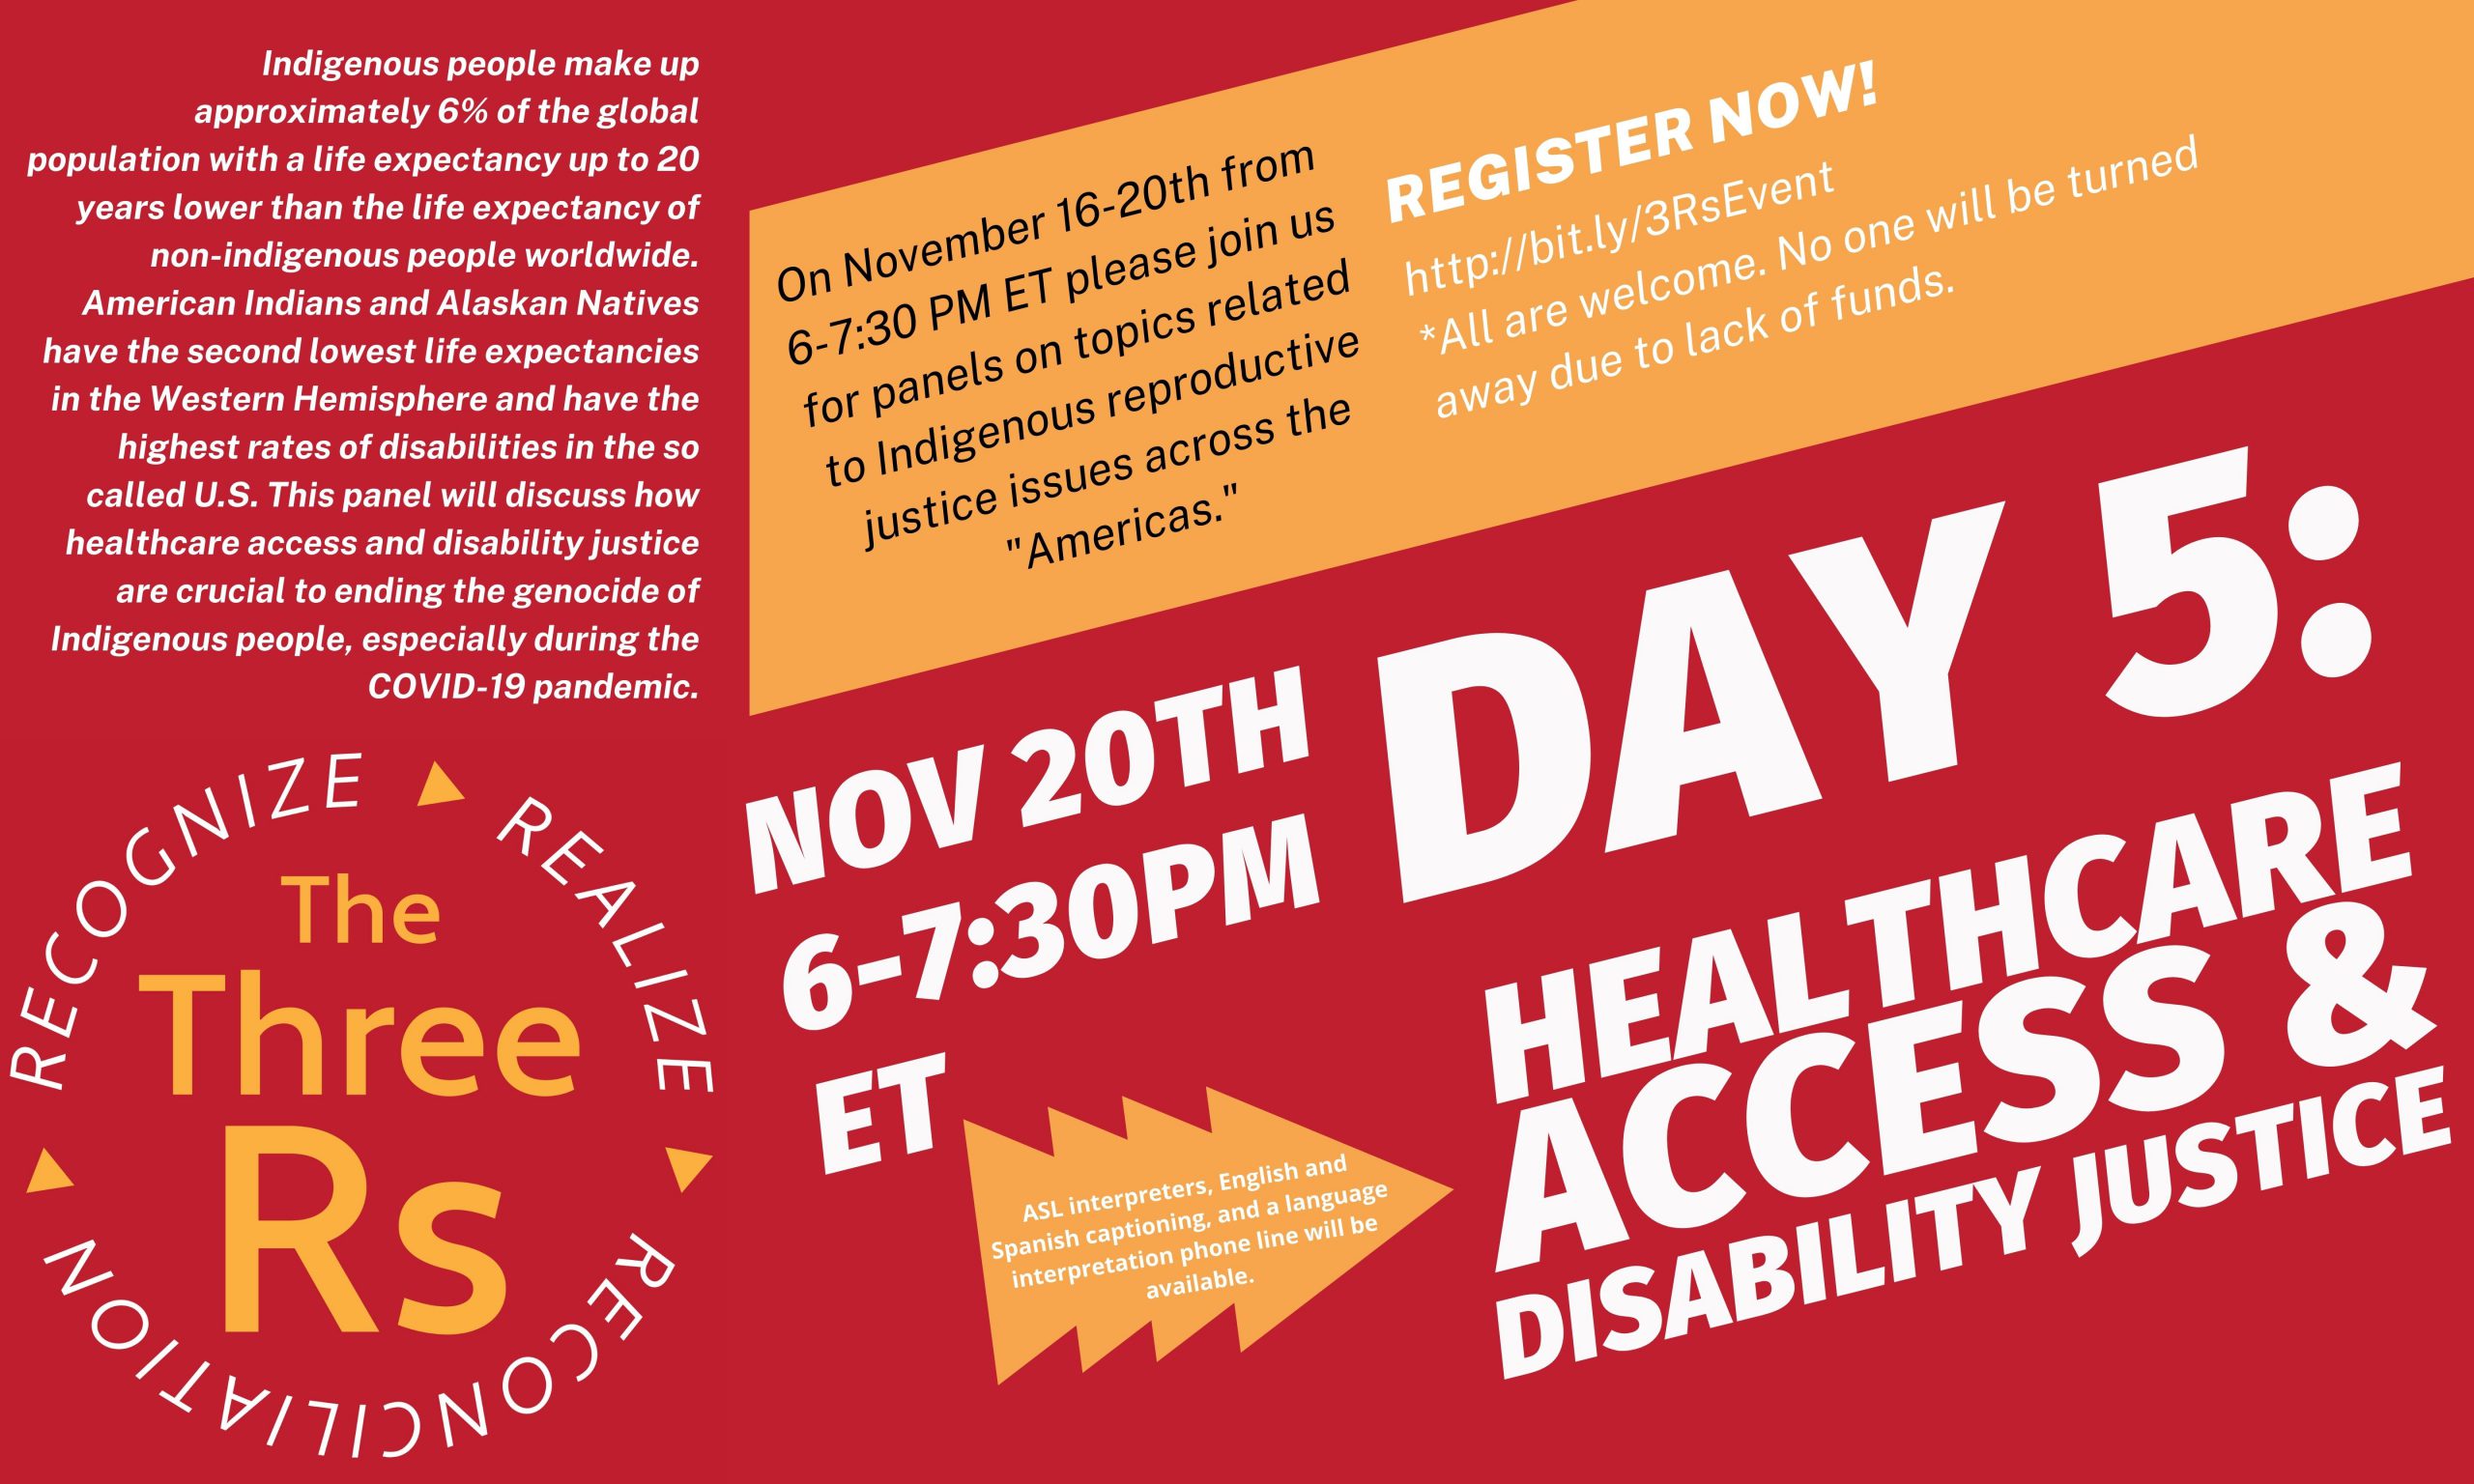 Healthcare access & disability justice